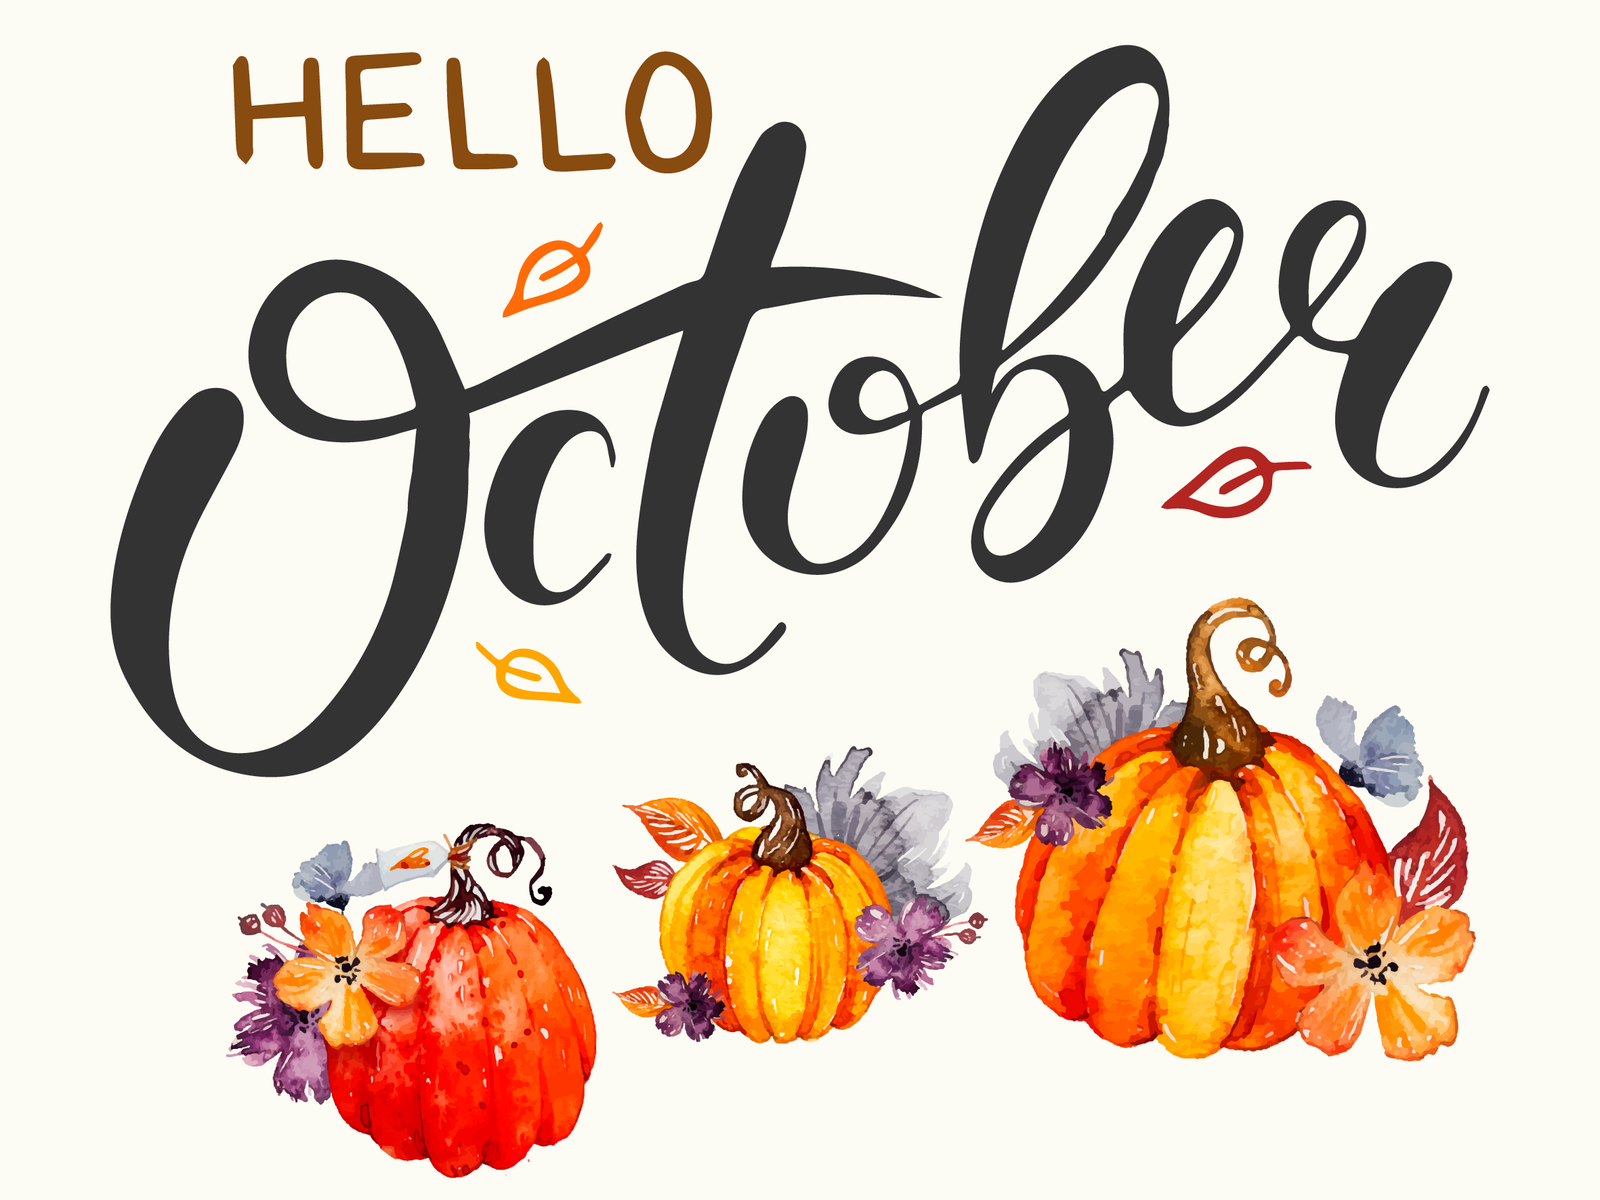 Hello October 2018! by Cromatix Creative Image Lab on Dribbble